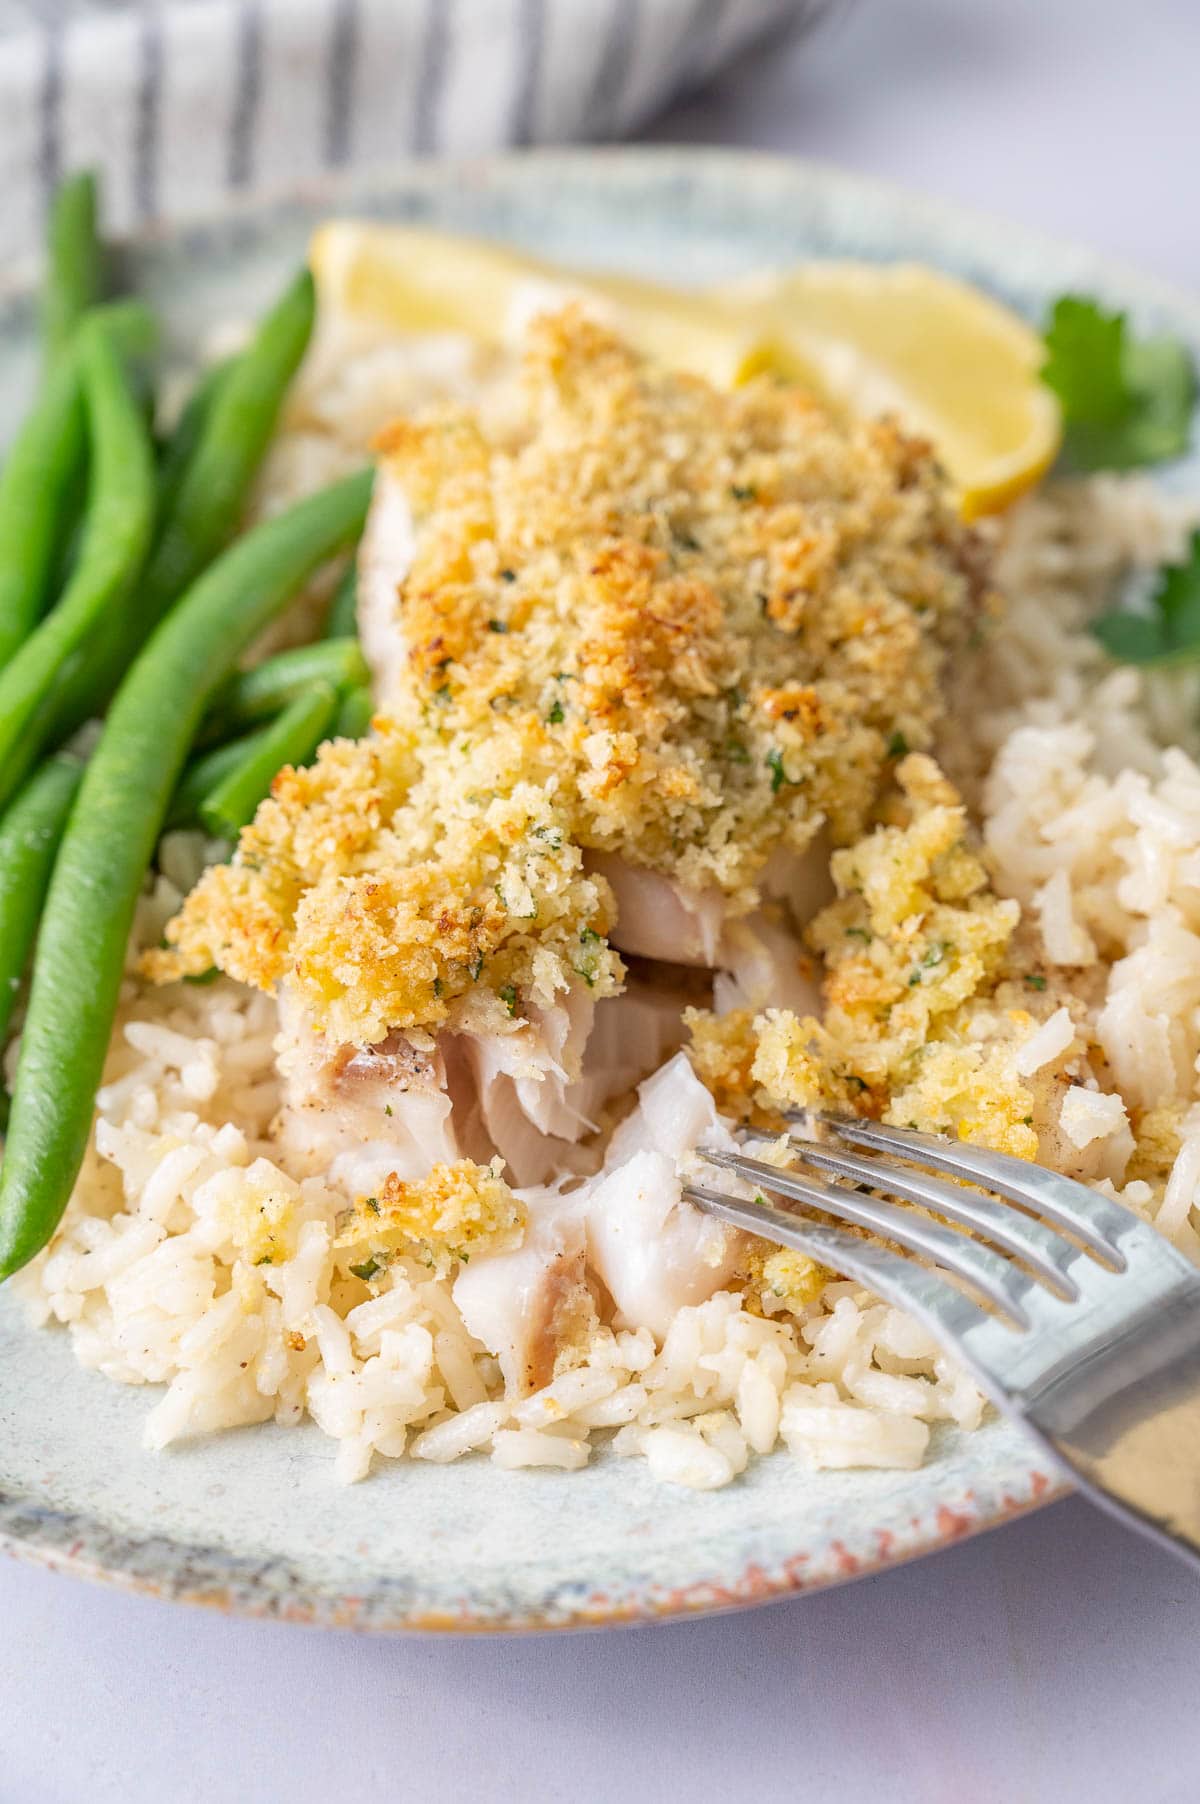 Parmesan crusted cod with butter garlic rice on a plate.